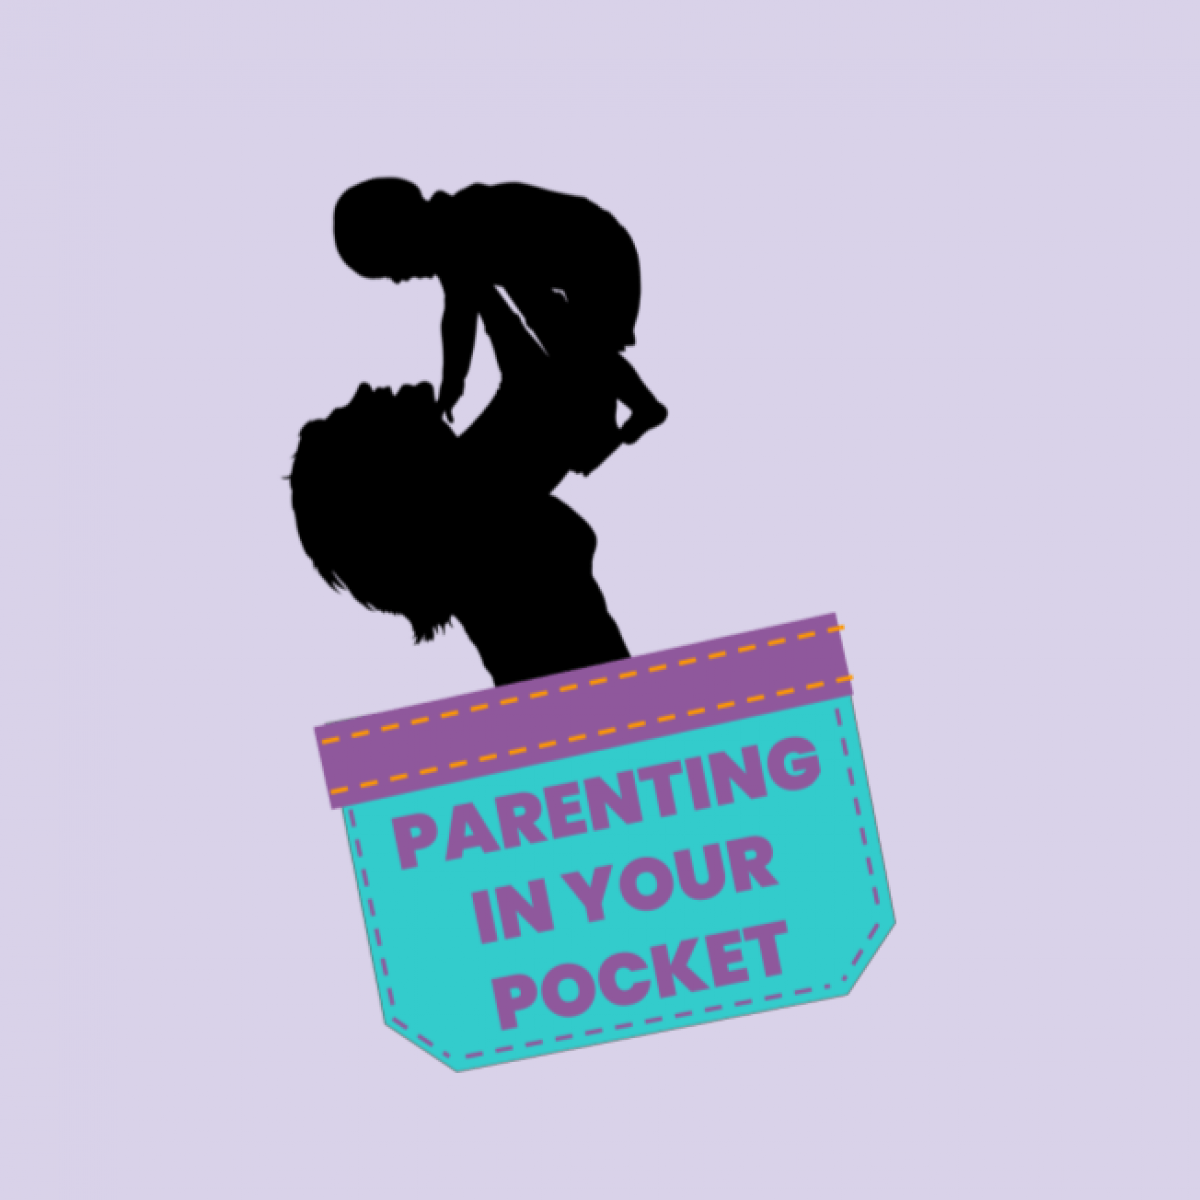 Parenting in your pocket